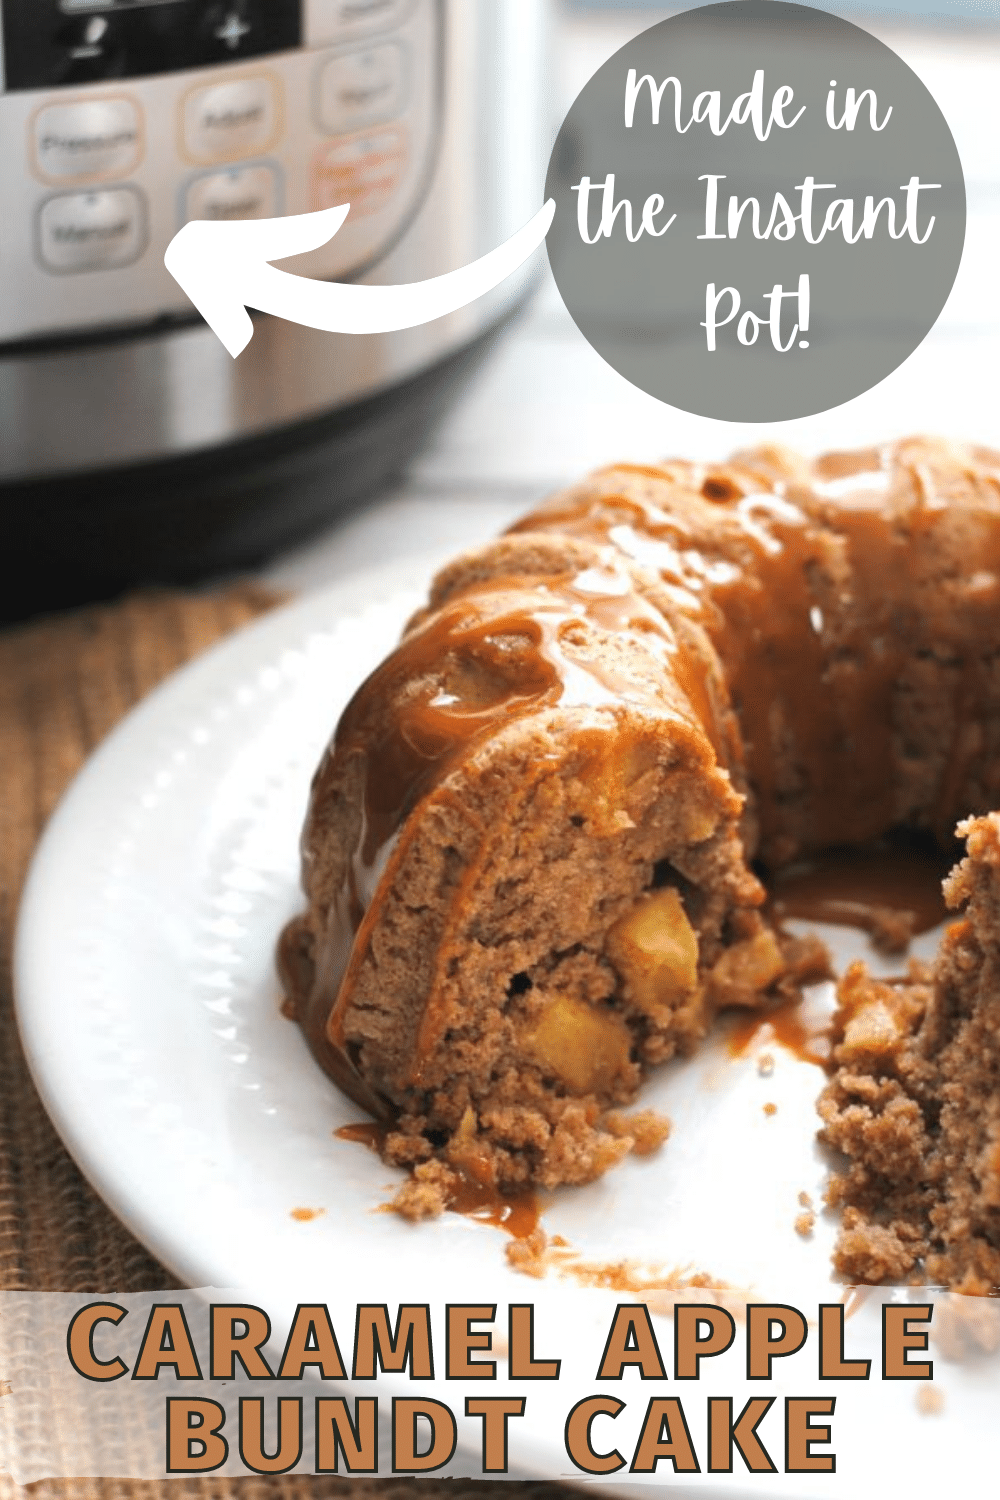 Use your Instant Pot to make this moist, delicious Caramel Apple Bundt Cake. No need to heat up the kitchen by running the oven for an hour! #instantpot #pressurecooker #caramelapple #cake via @wondermomwannab